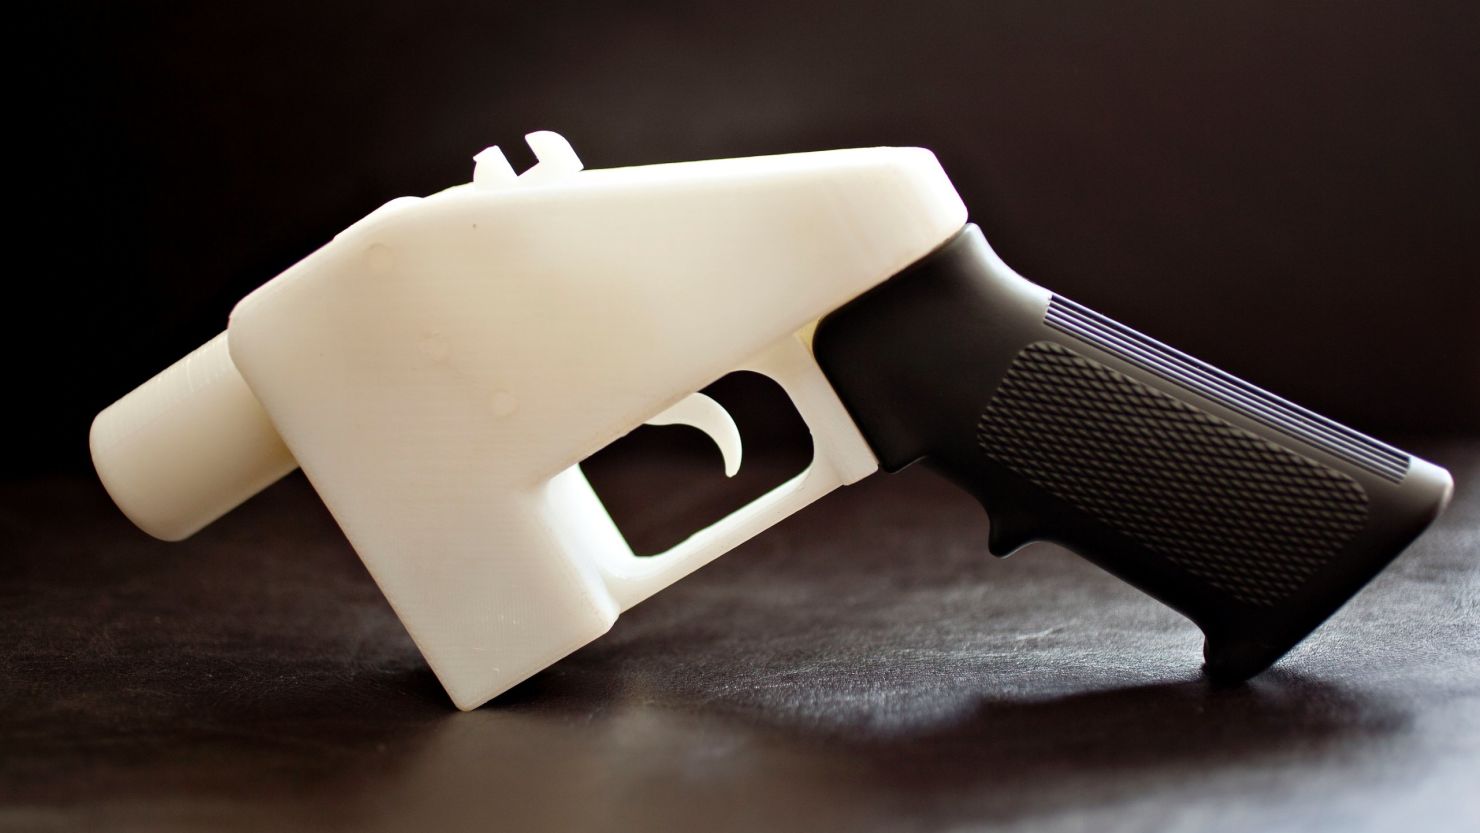 The U.S. State Department banned the inventor of a plastic handgun, "The Liberator," from distributing its instructions.